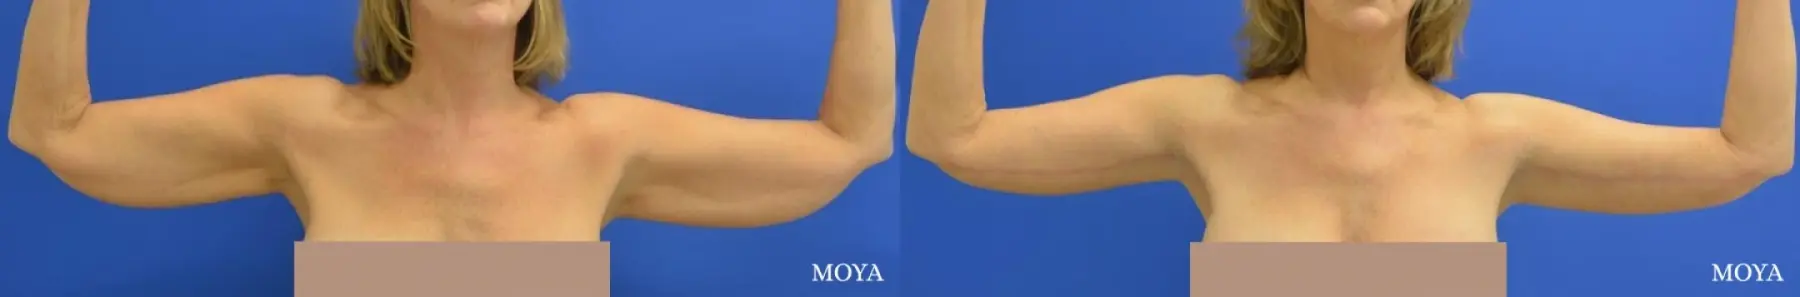 Arm Lift (MAJOR: inseam) - Before and After 1